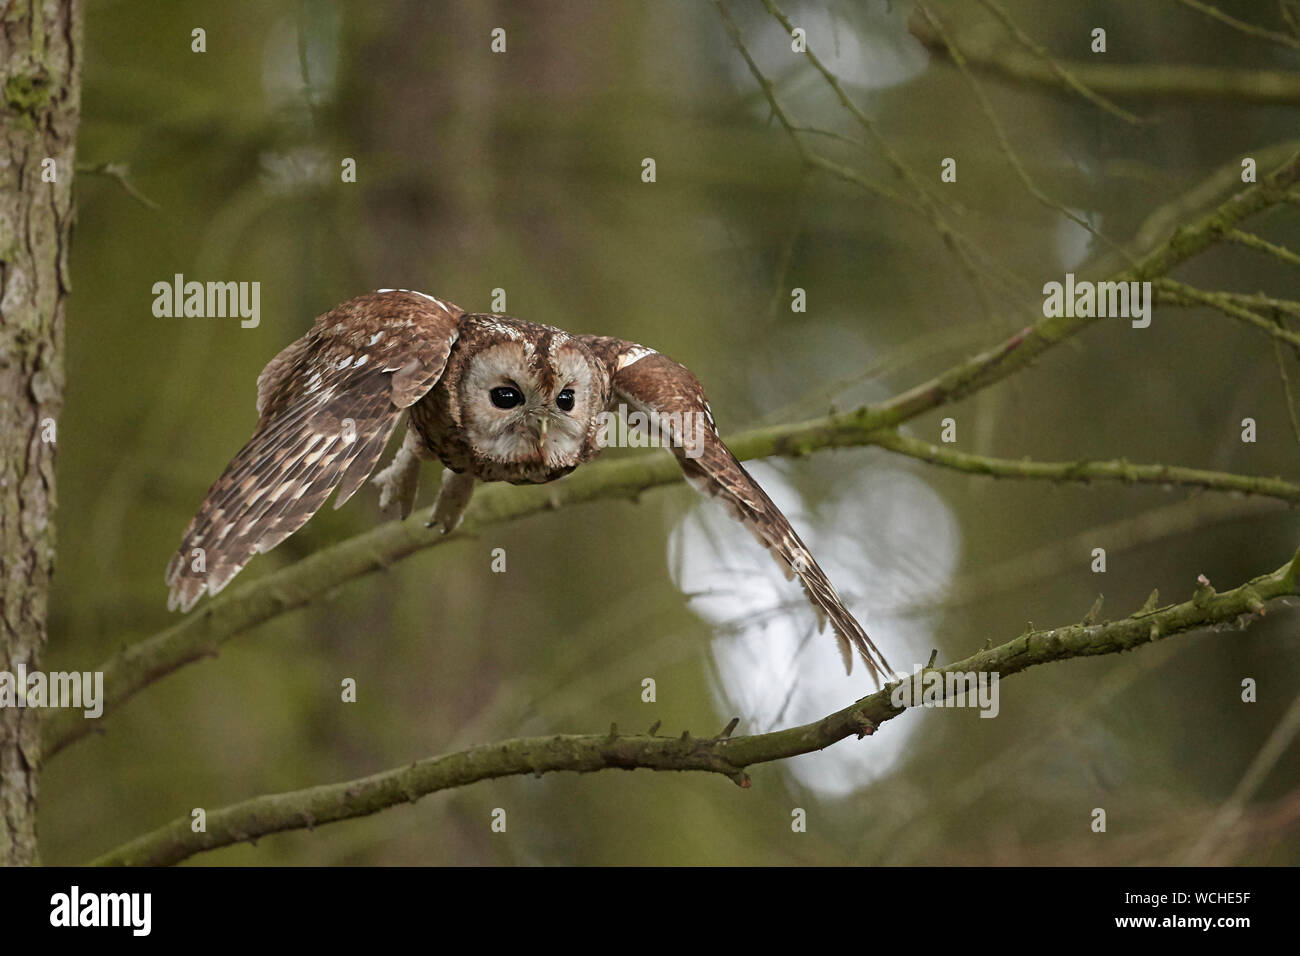 Tawny owl, Strix aluco in flight in a wood, flying, East Yorkshire, UK. Stock Photo